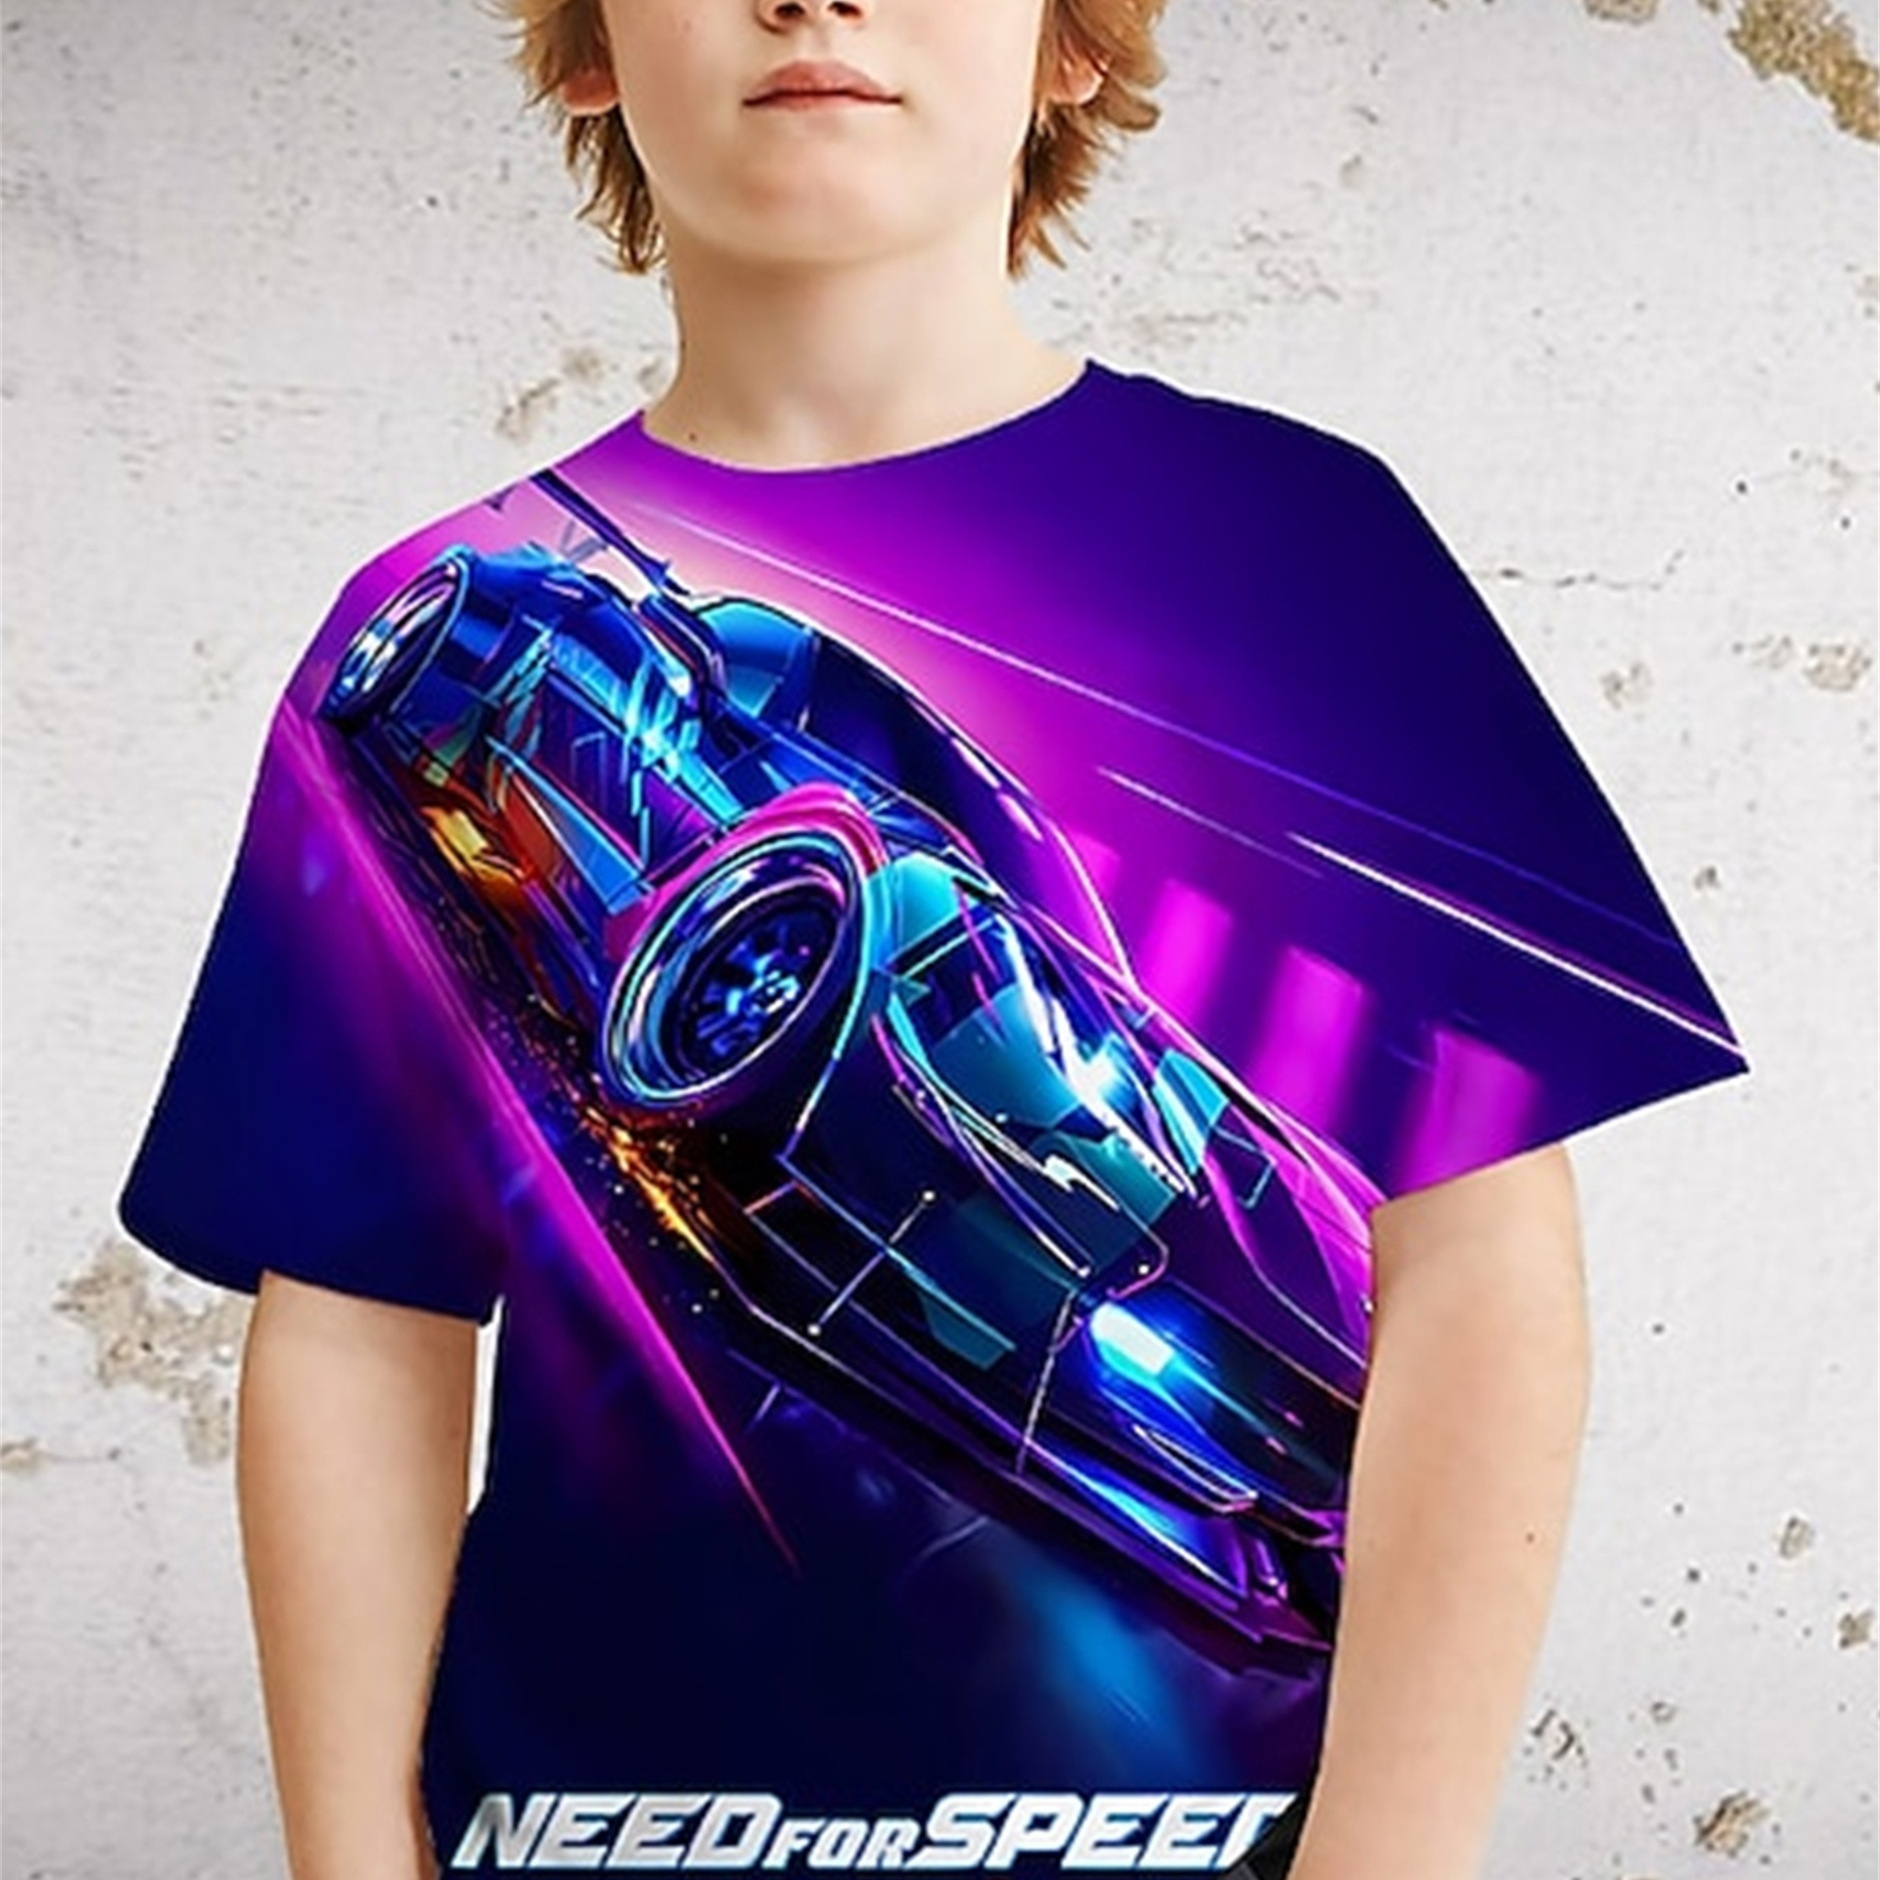 

Fashion Cool Racing Car Print Boys Creative T-shirt, Casual Lightweight Comfy Short Sleeve Crew Neck Tee Tops, Kids Clothings For Summer